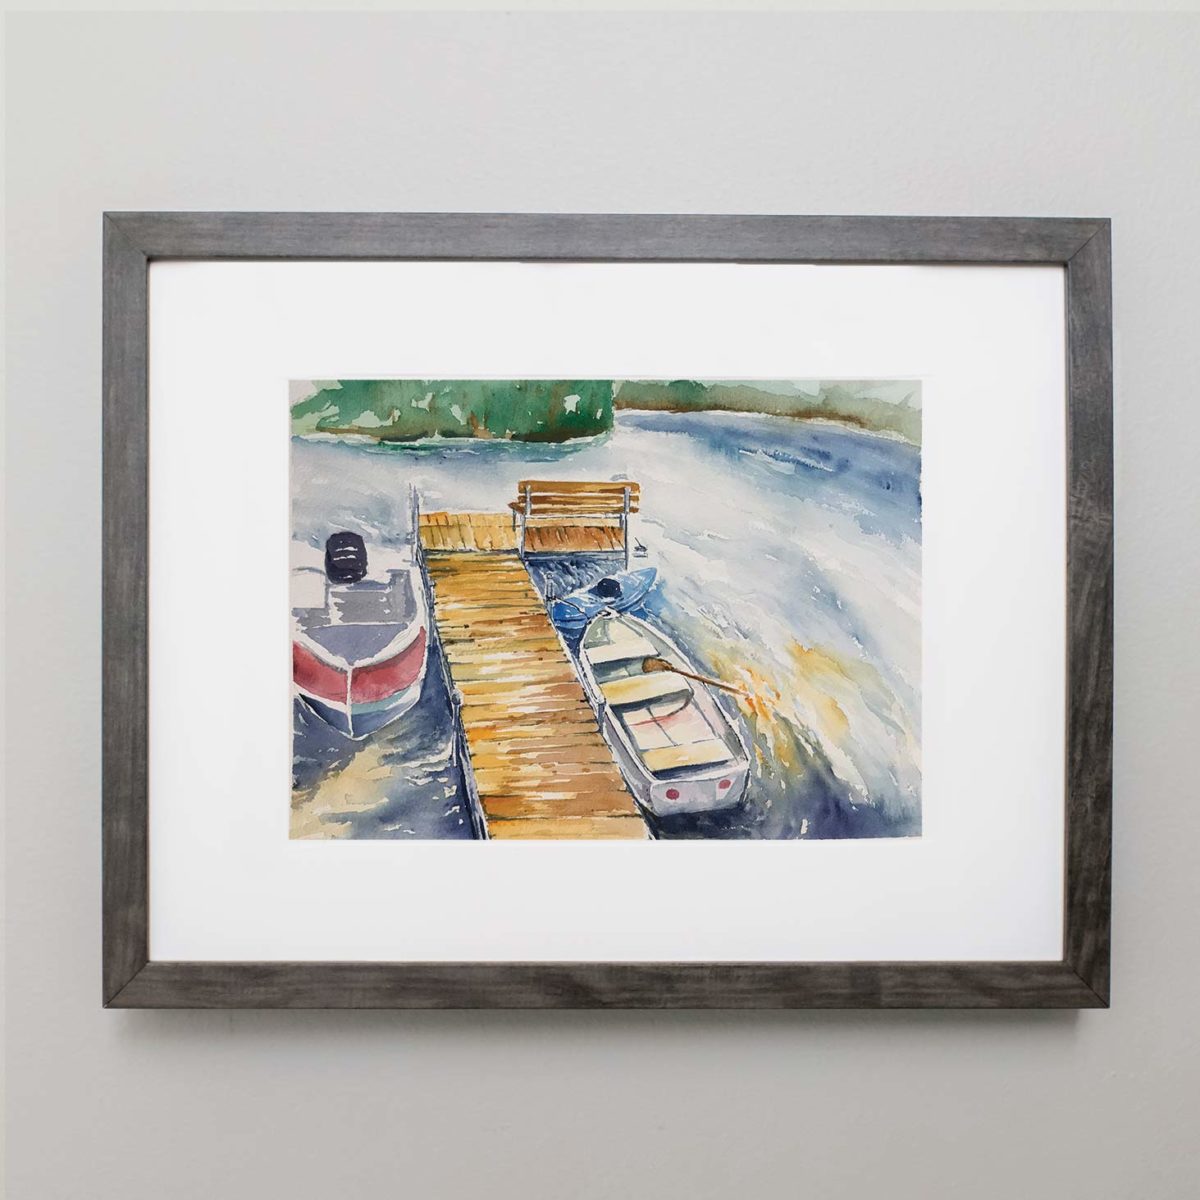 Watercolor of boats on a lake